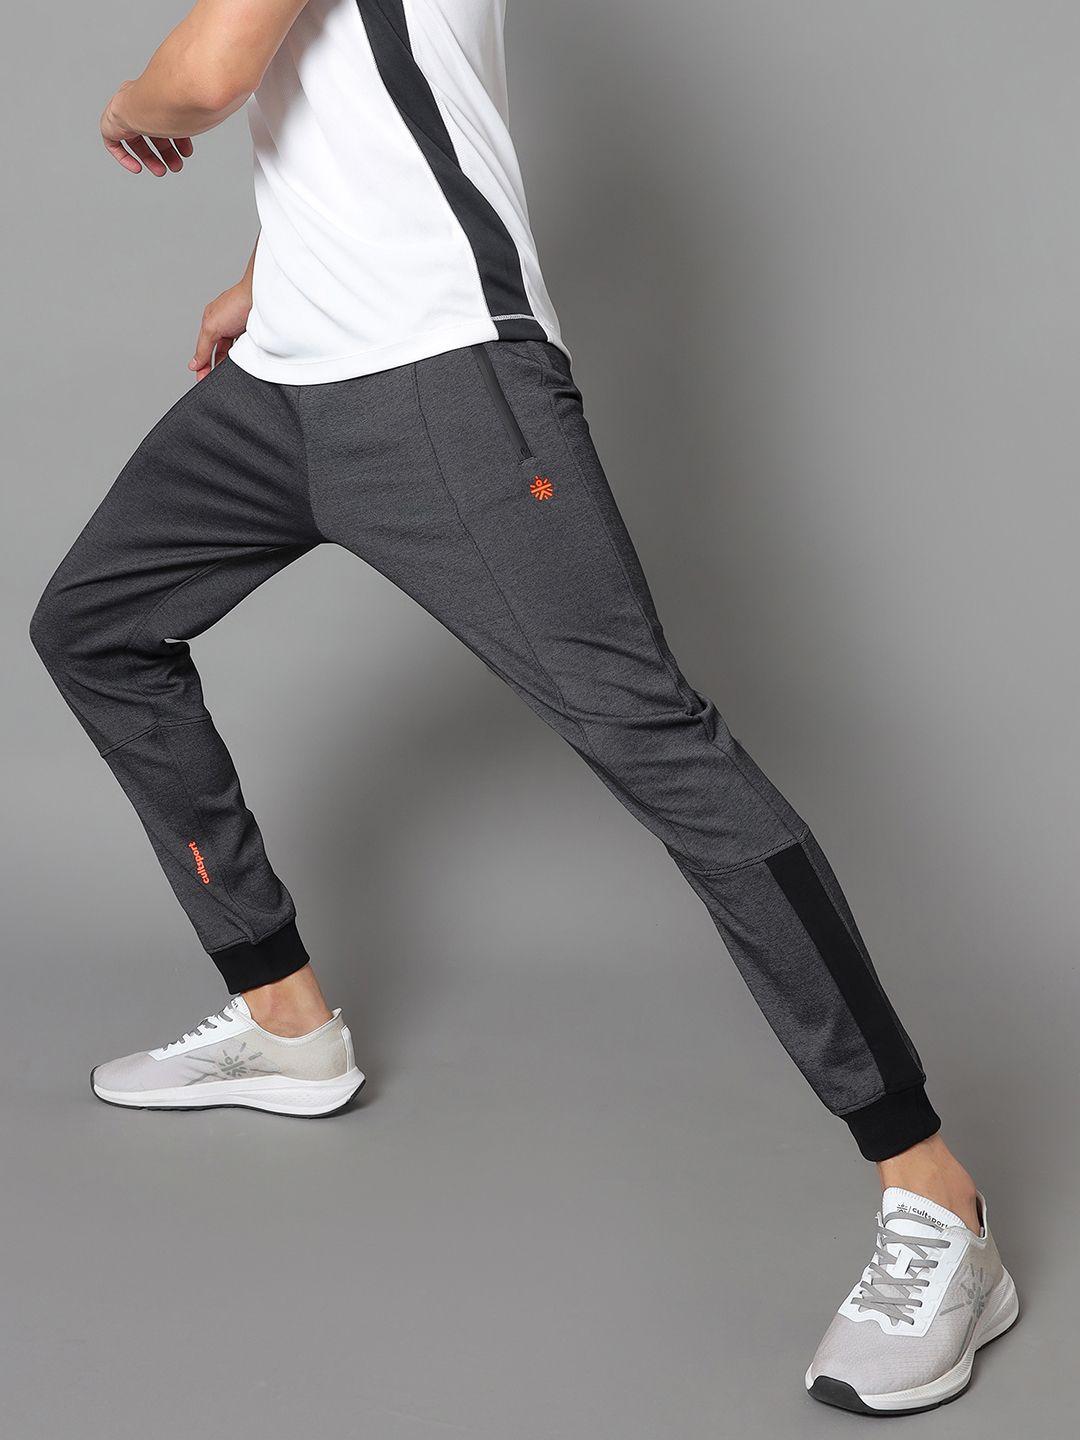 cultsport-men-charcoal-grey-solid-tapered-fit-joggers